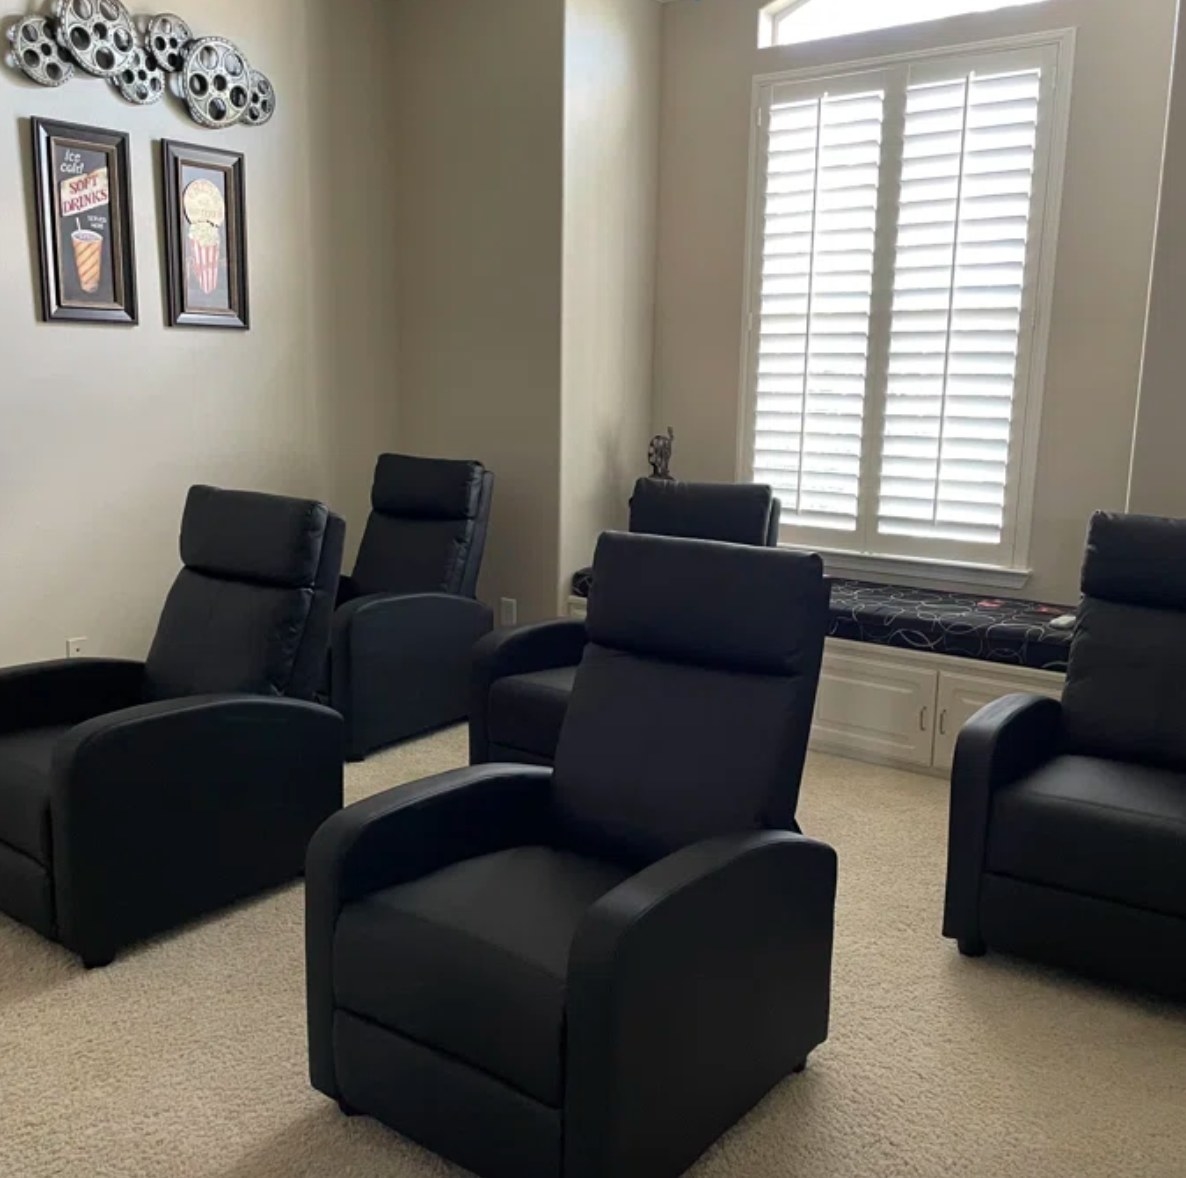 a Wayfair reviewer image of five black reclining chairs in their home theater